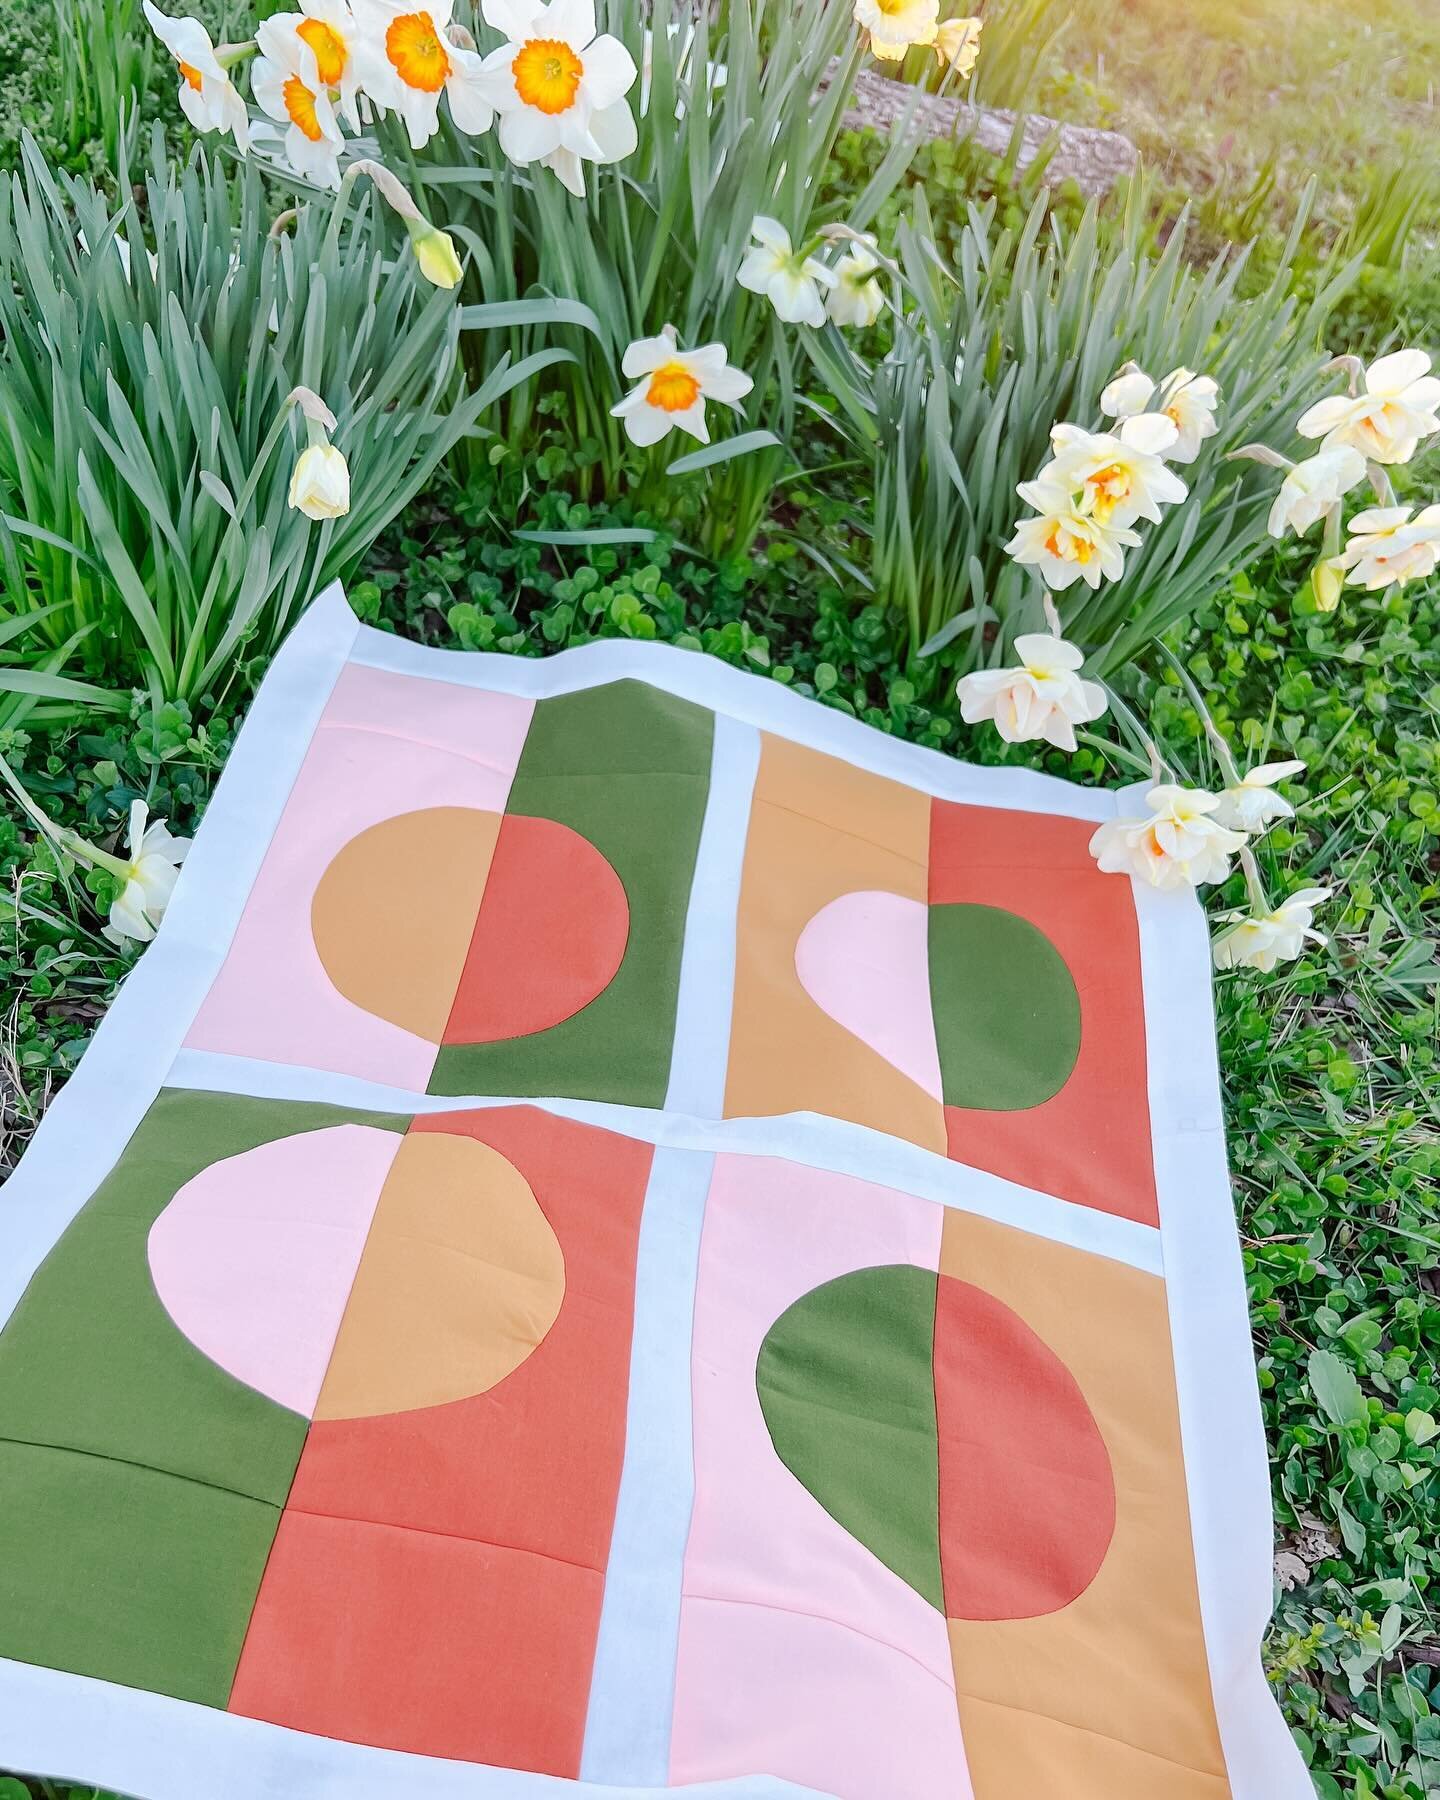 Happy Release Day to @remivailstudio! #fullcirclequilt is out in the world! Roll right on over to Tamara&rsquo;s shop and get yourself a copy!!! But don&rsquo;t forget to stop and smell the flowers in the way!